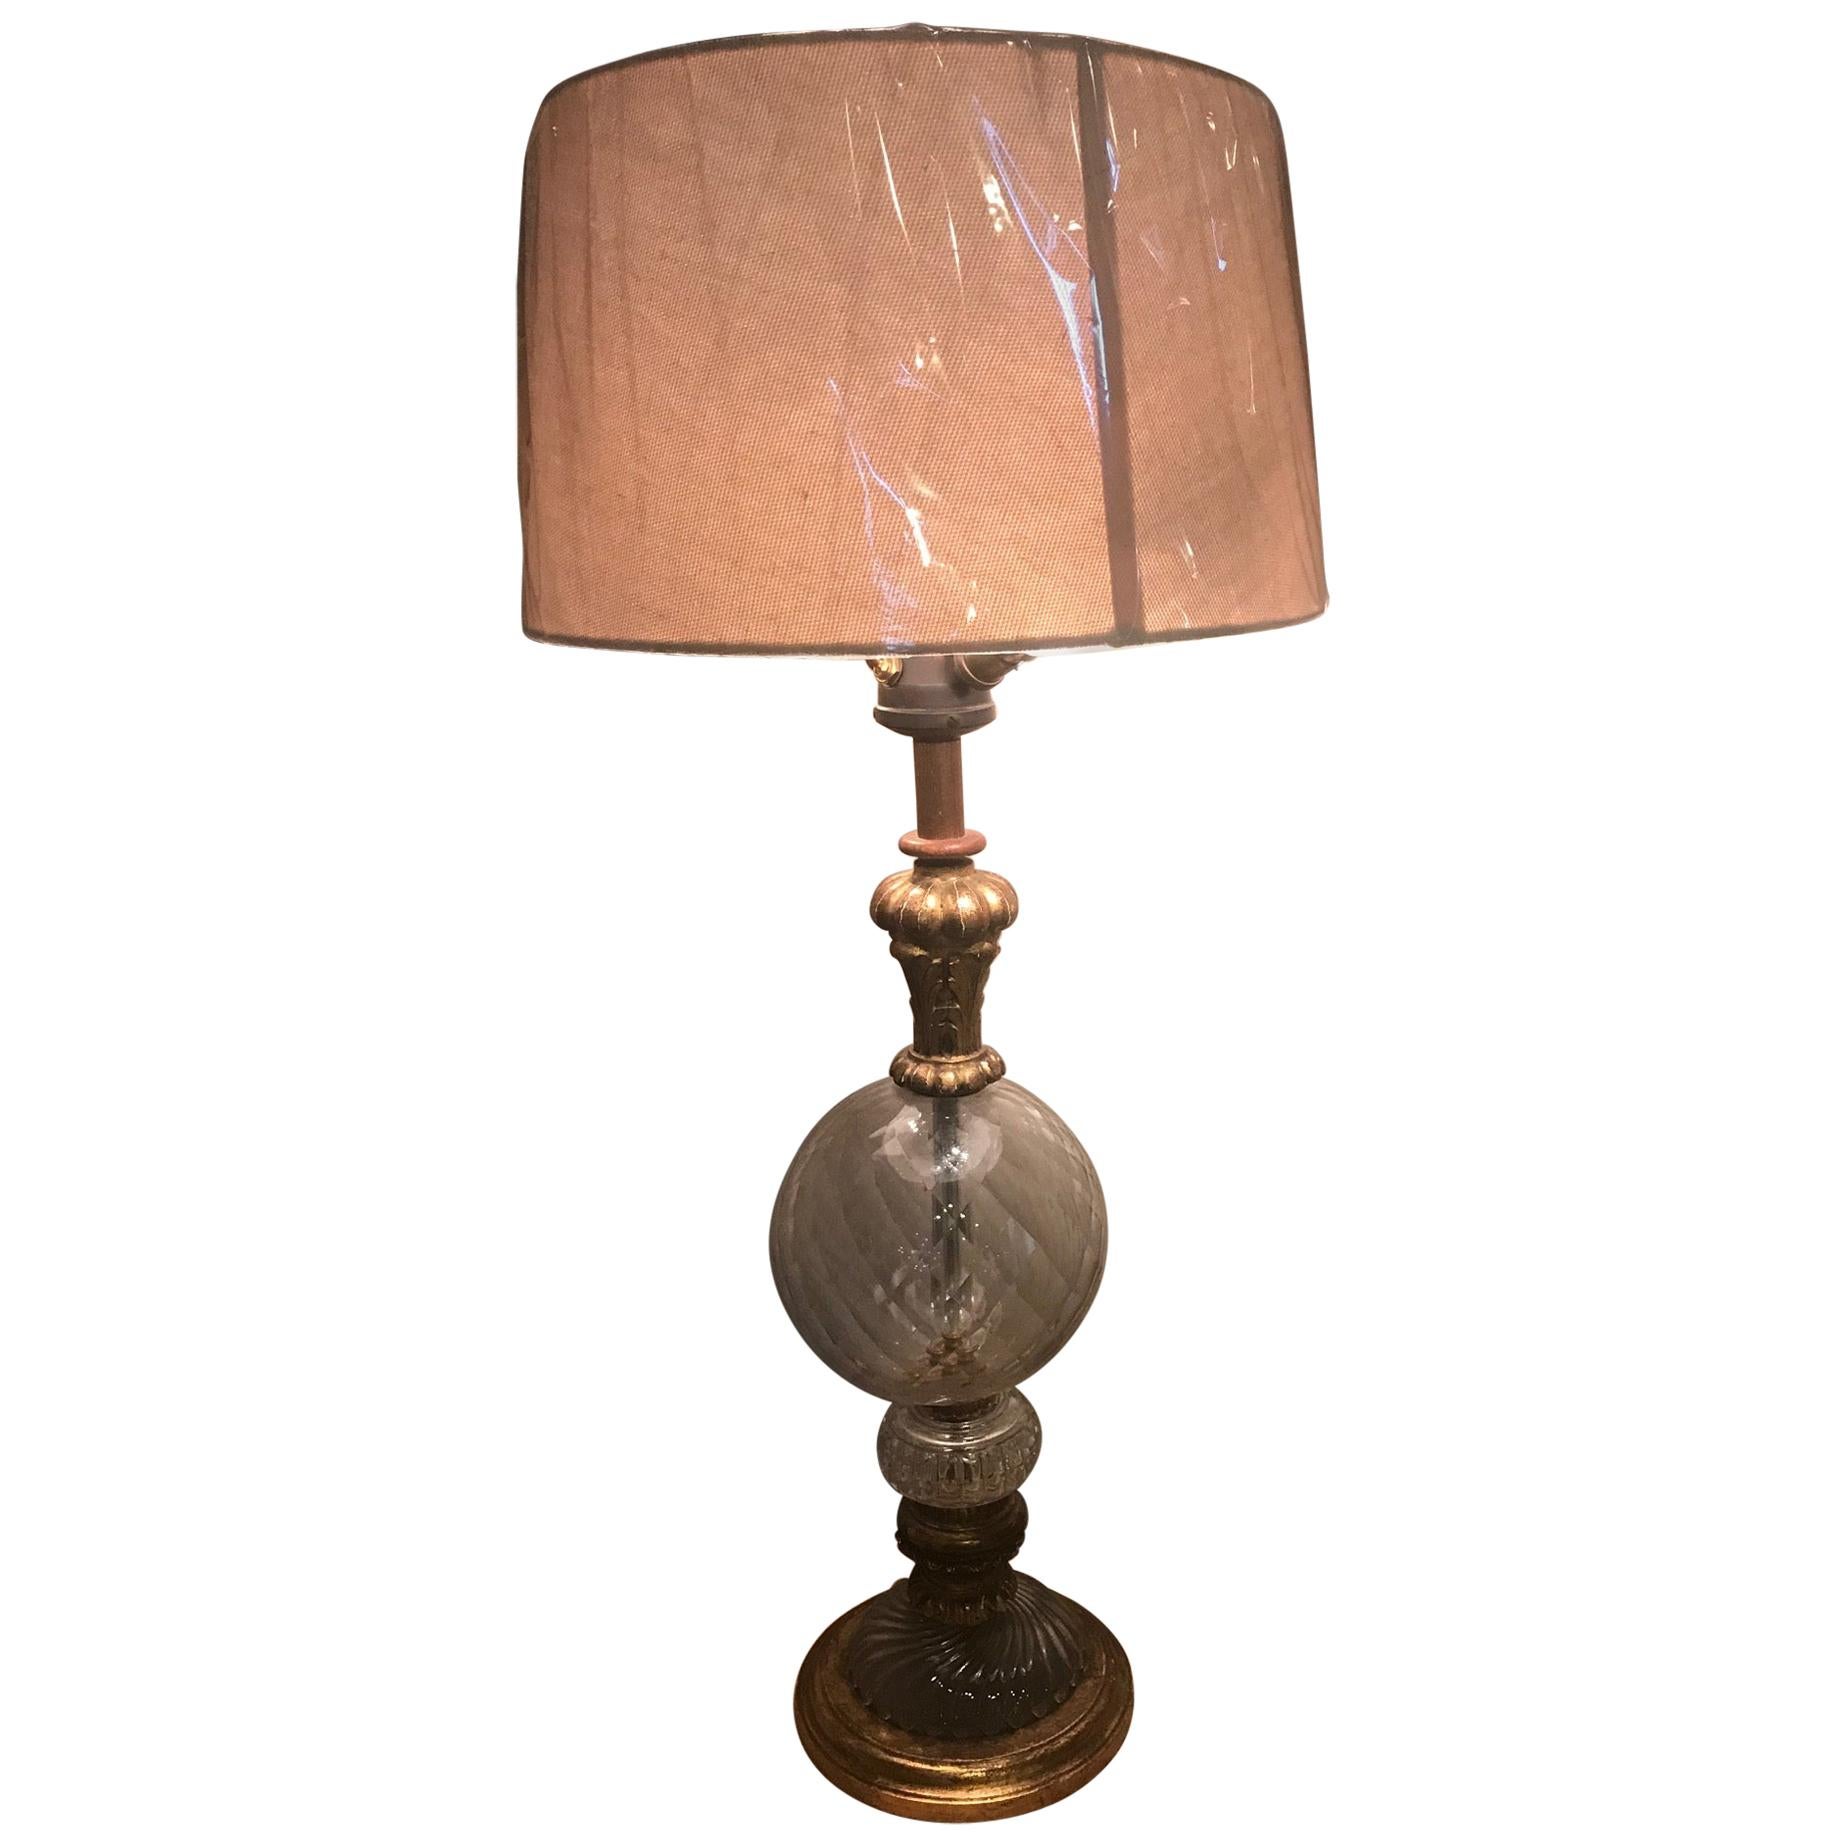 20th Century Italian Glass and Golden Wood Table Lamp, 1920s